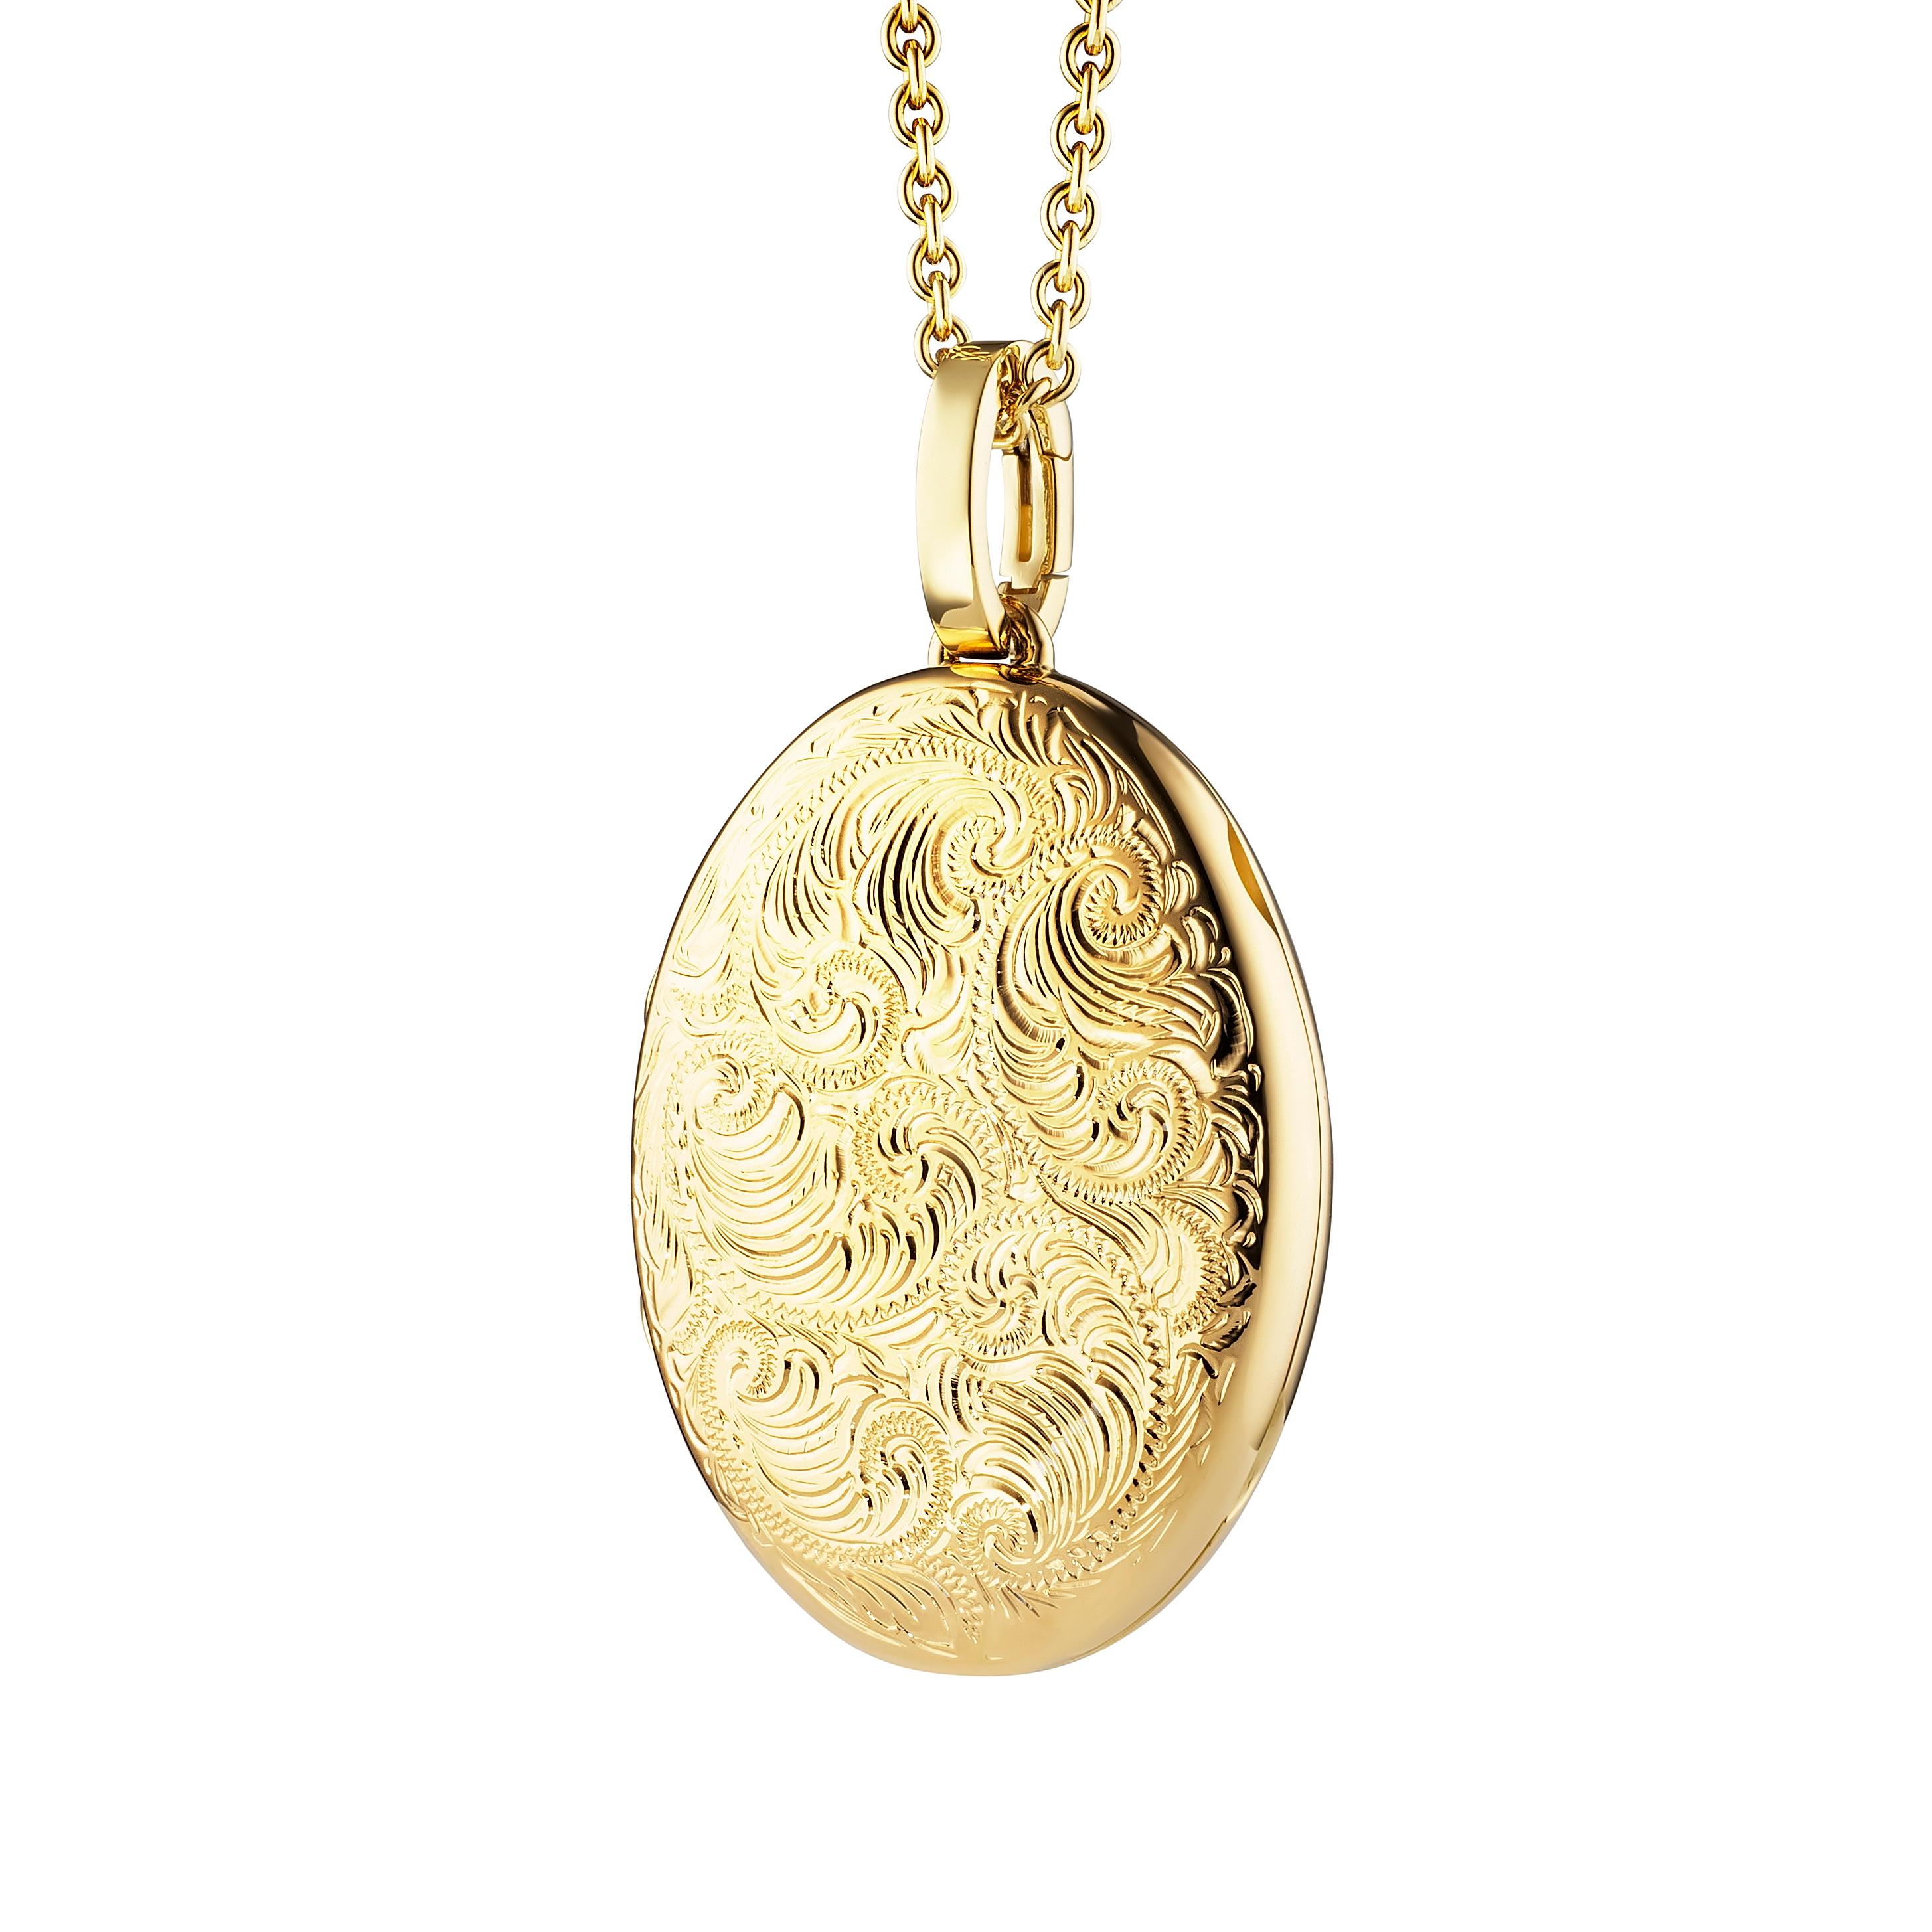 Oval Locket Pendant with Scroll Engraving - 18k Yellow Gold - 32.0 x 23.0 mm In New Condition For Sale In Pforzheim, DE